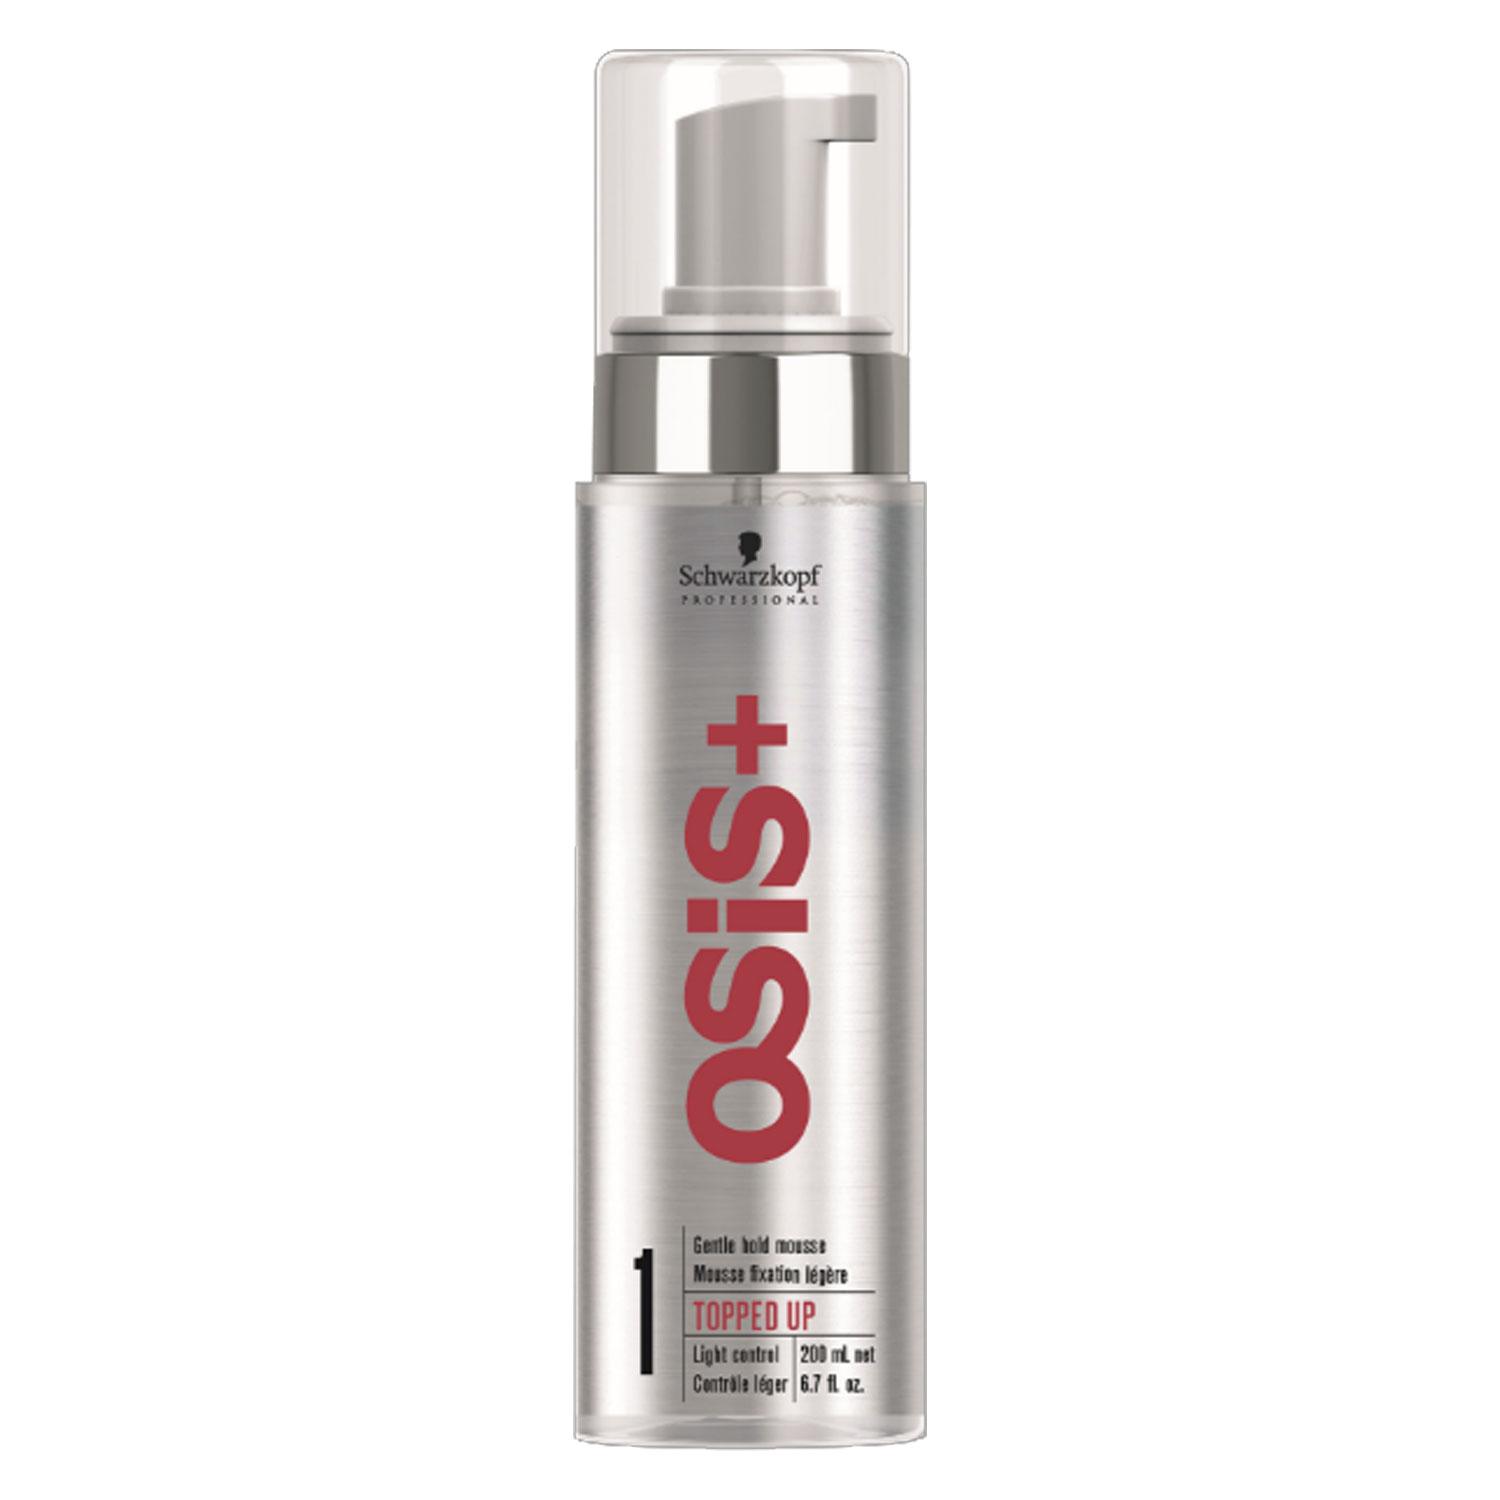 Osis - Topped Up